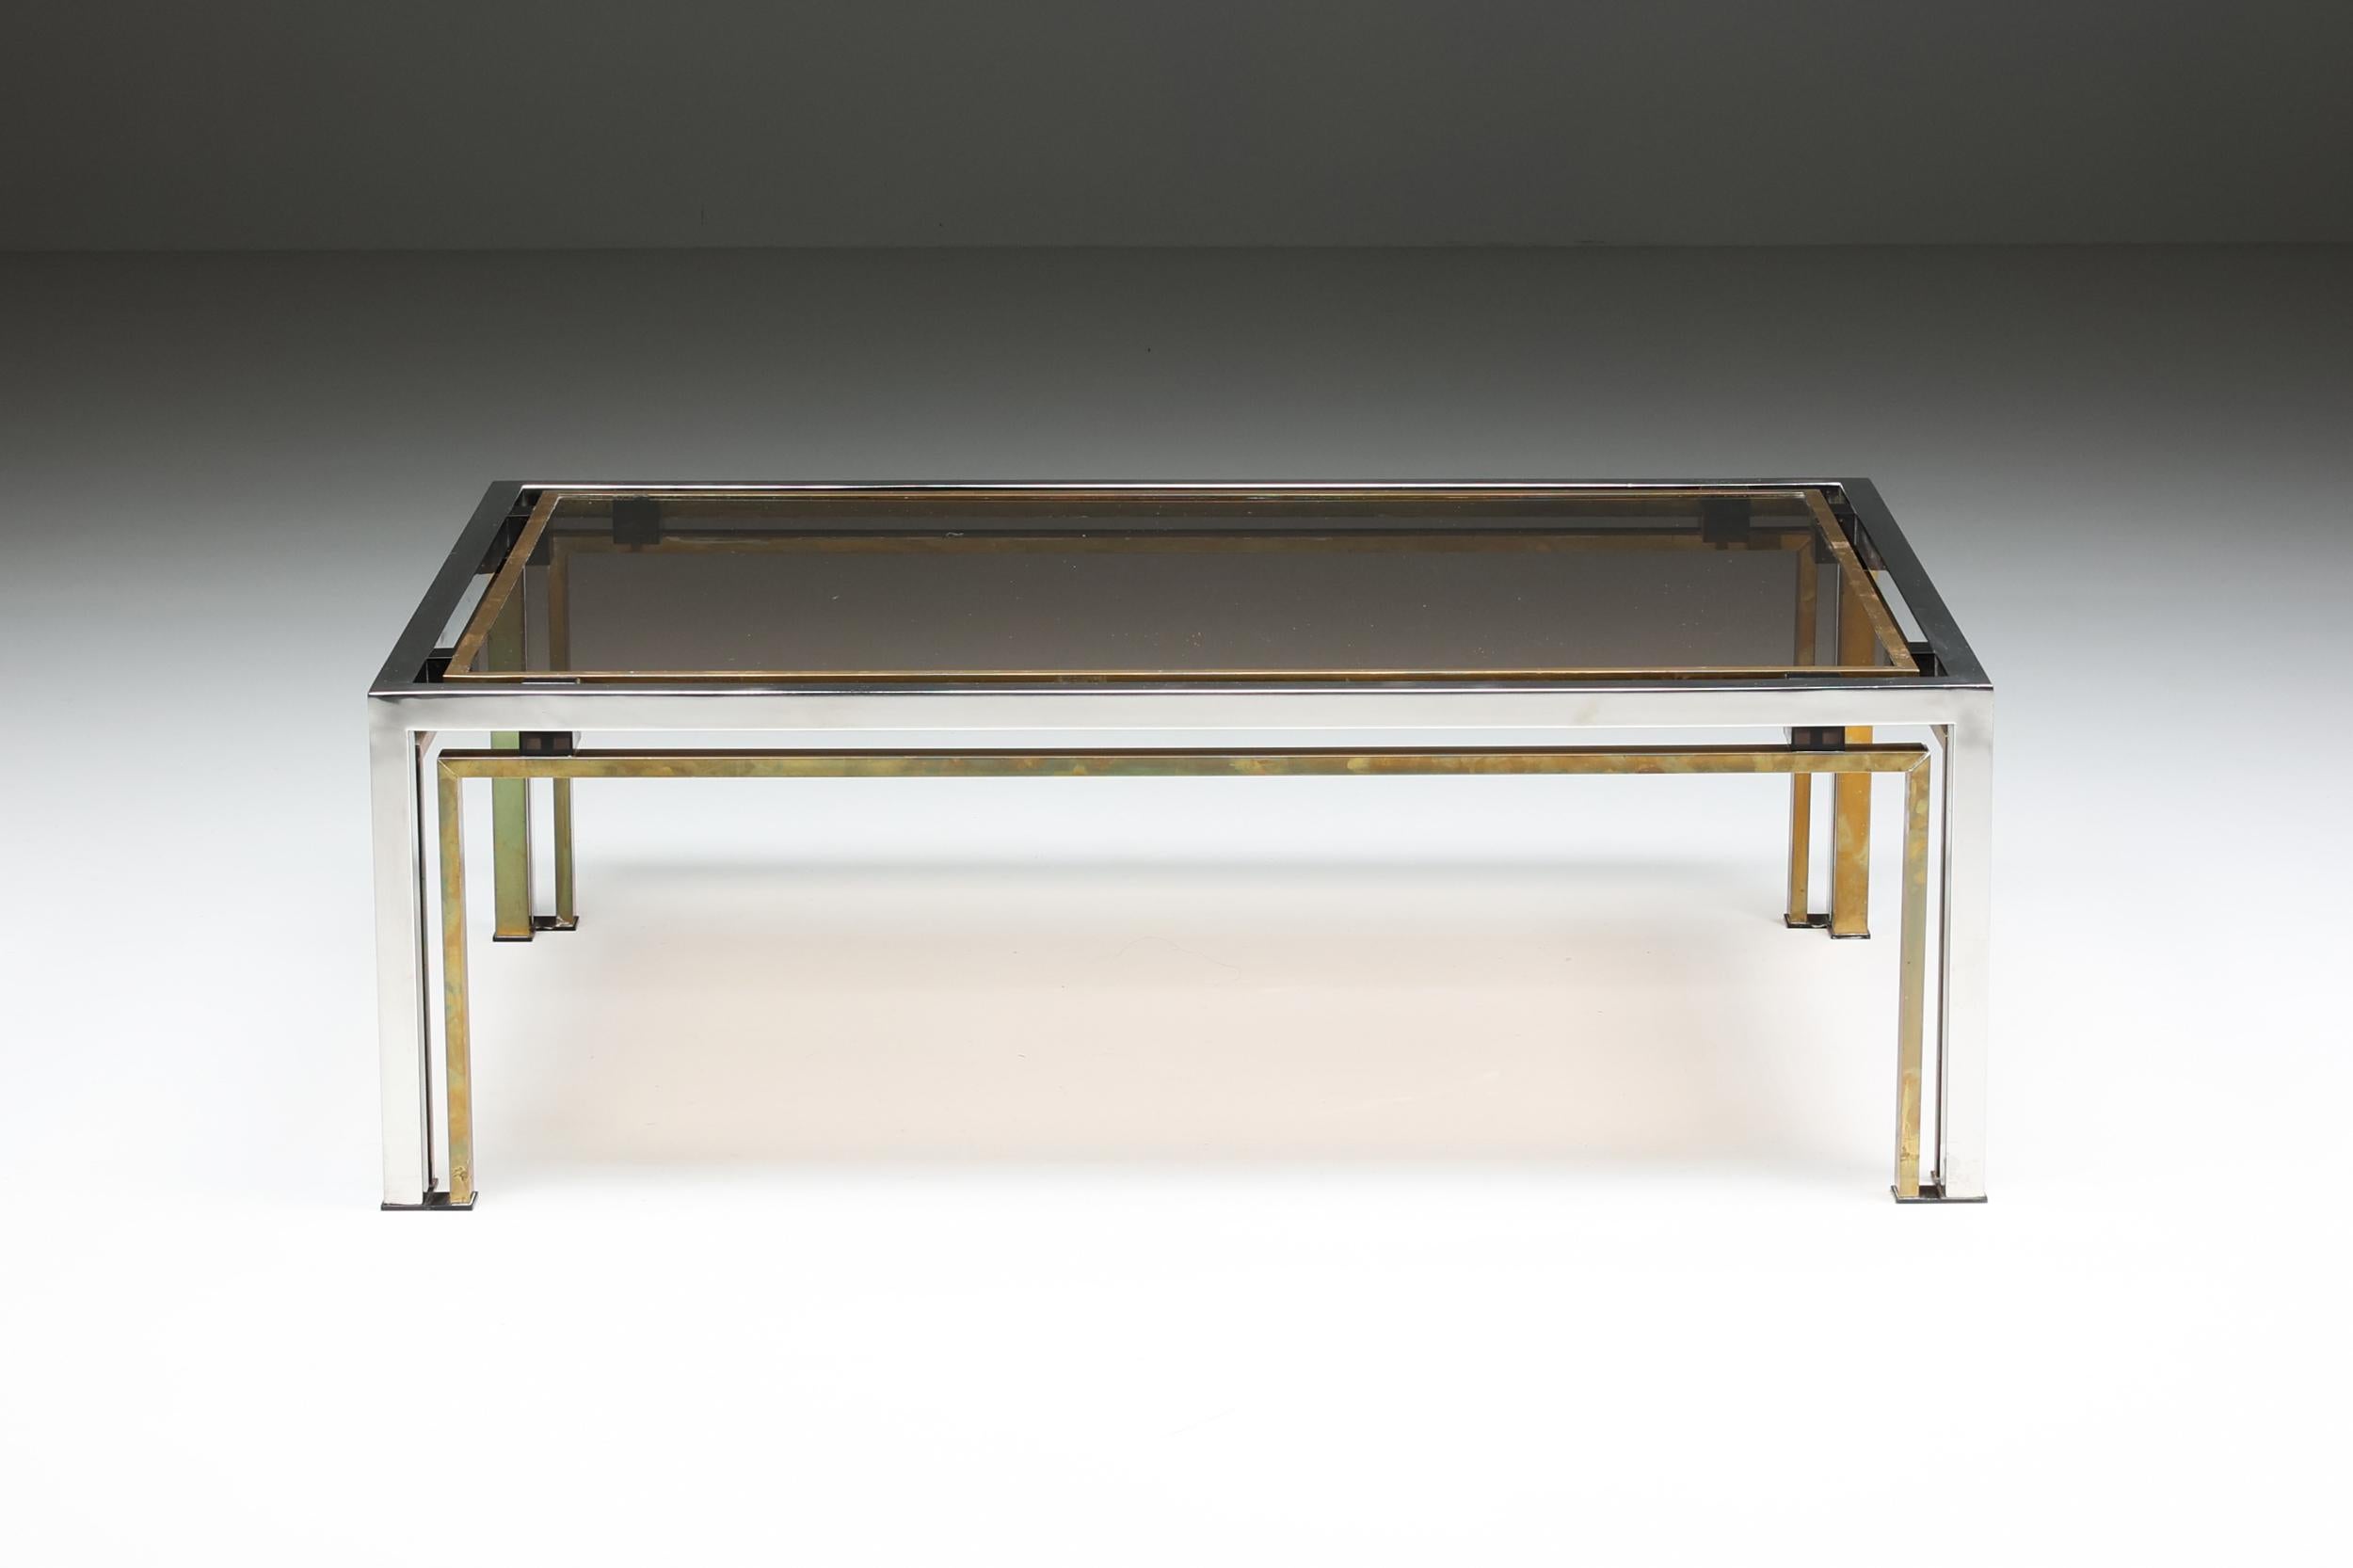 Rome Rega; Italy; Mid-Century Modern; coffee table; Cocktail table; Italian design; 

Mid-Century Modern rectangular shaped coffee/cocktail by Italian designer Rome Rega, Italy, 1970s. The sculptural glass and brass frame are contrasting nicely